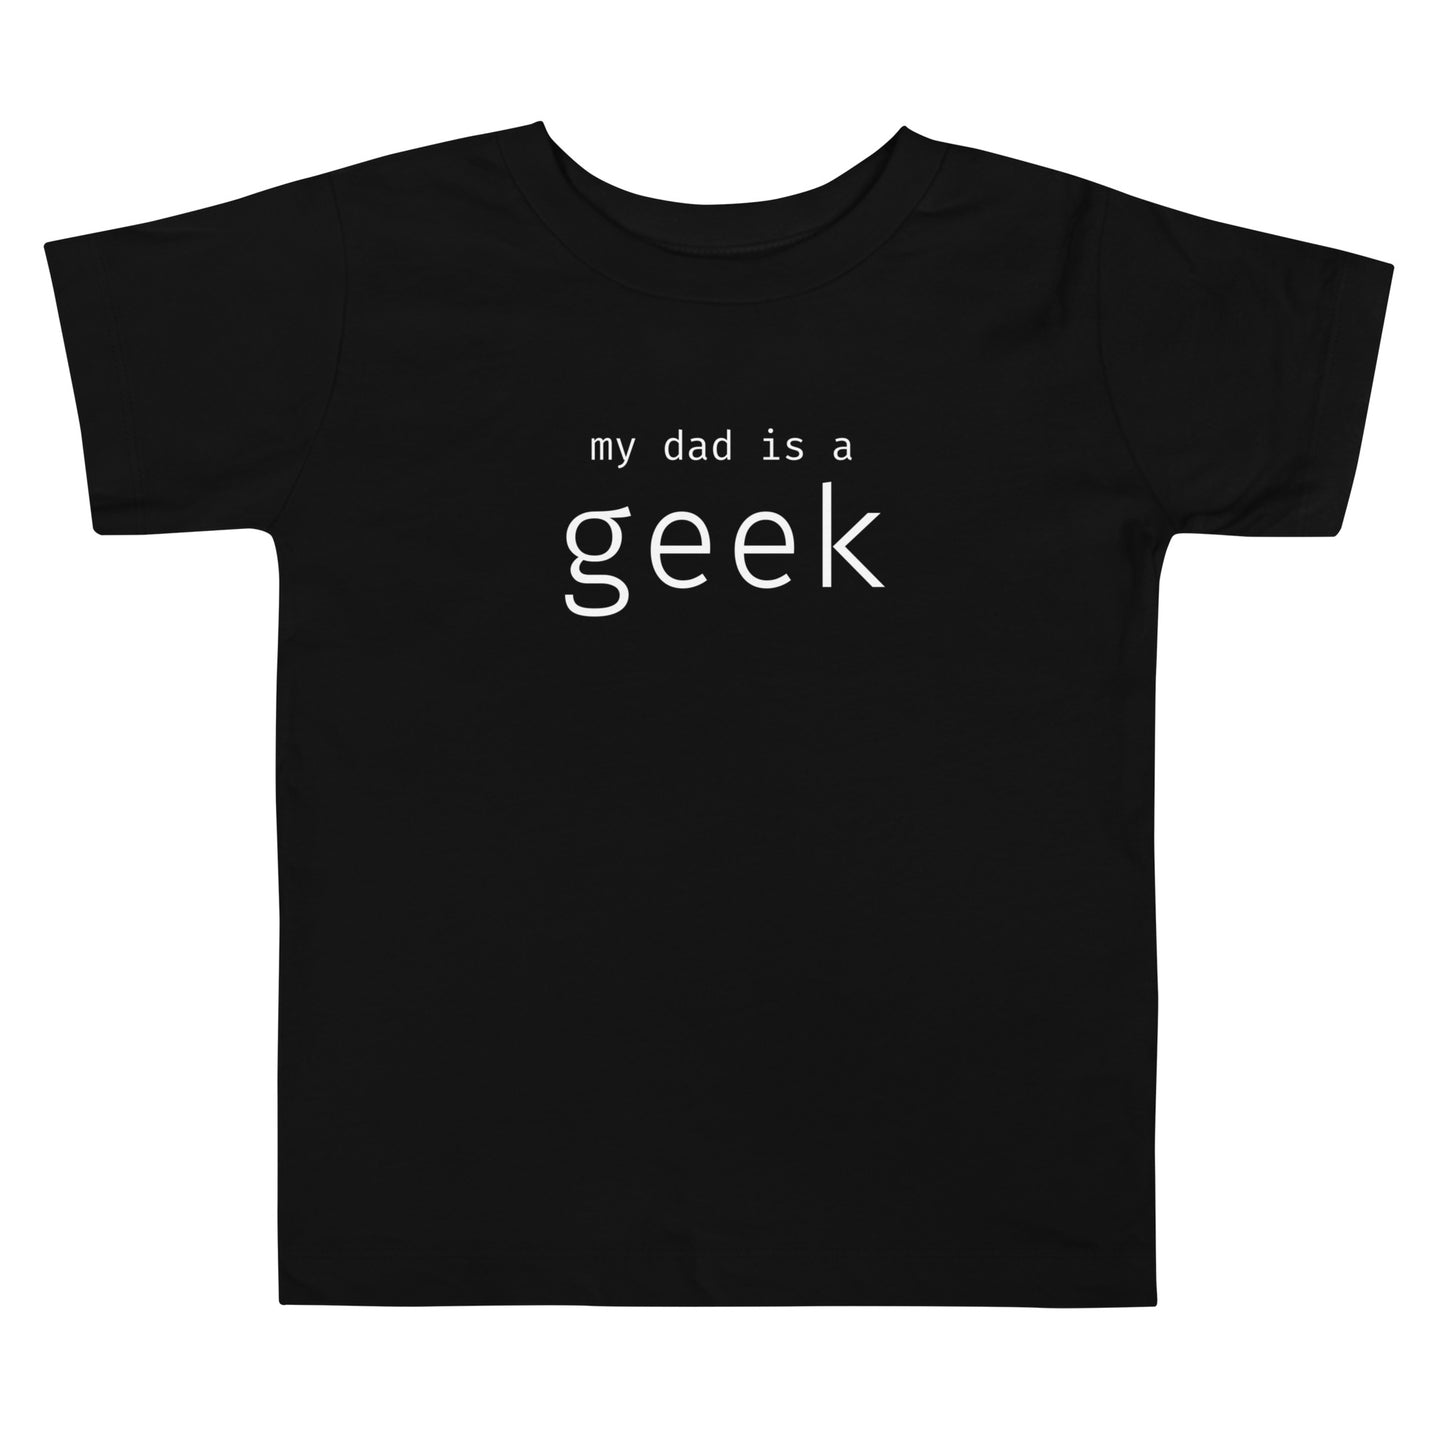 My dad is a geek - White Text - Toddler Short Sleeve Tee